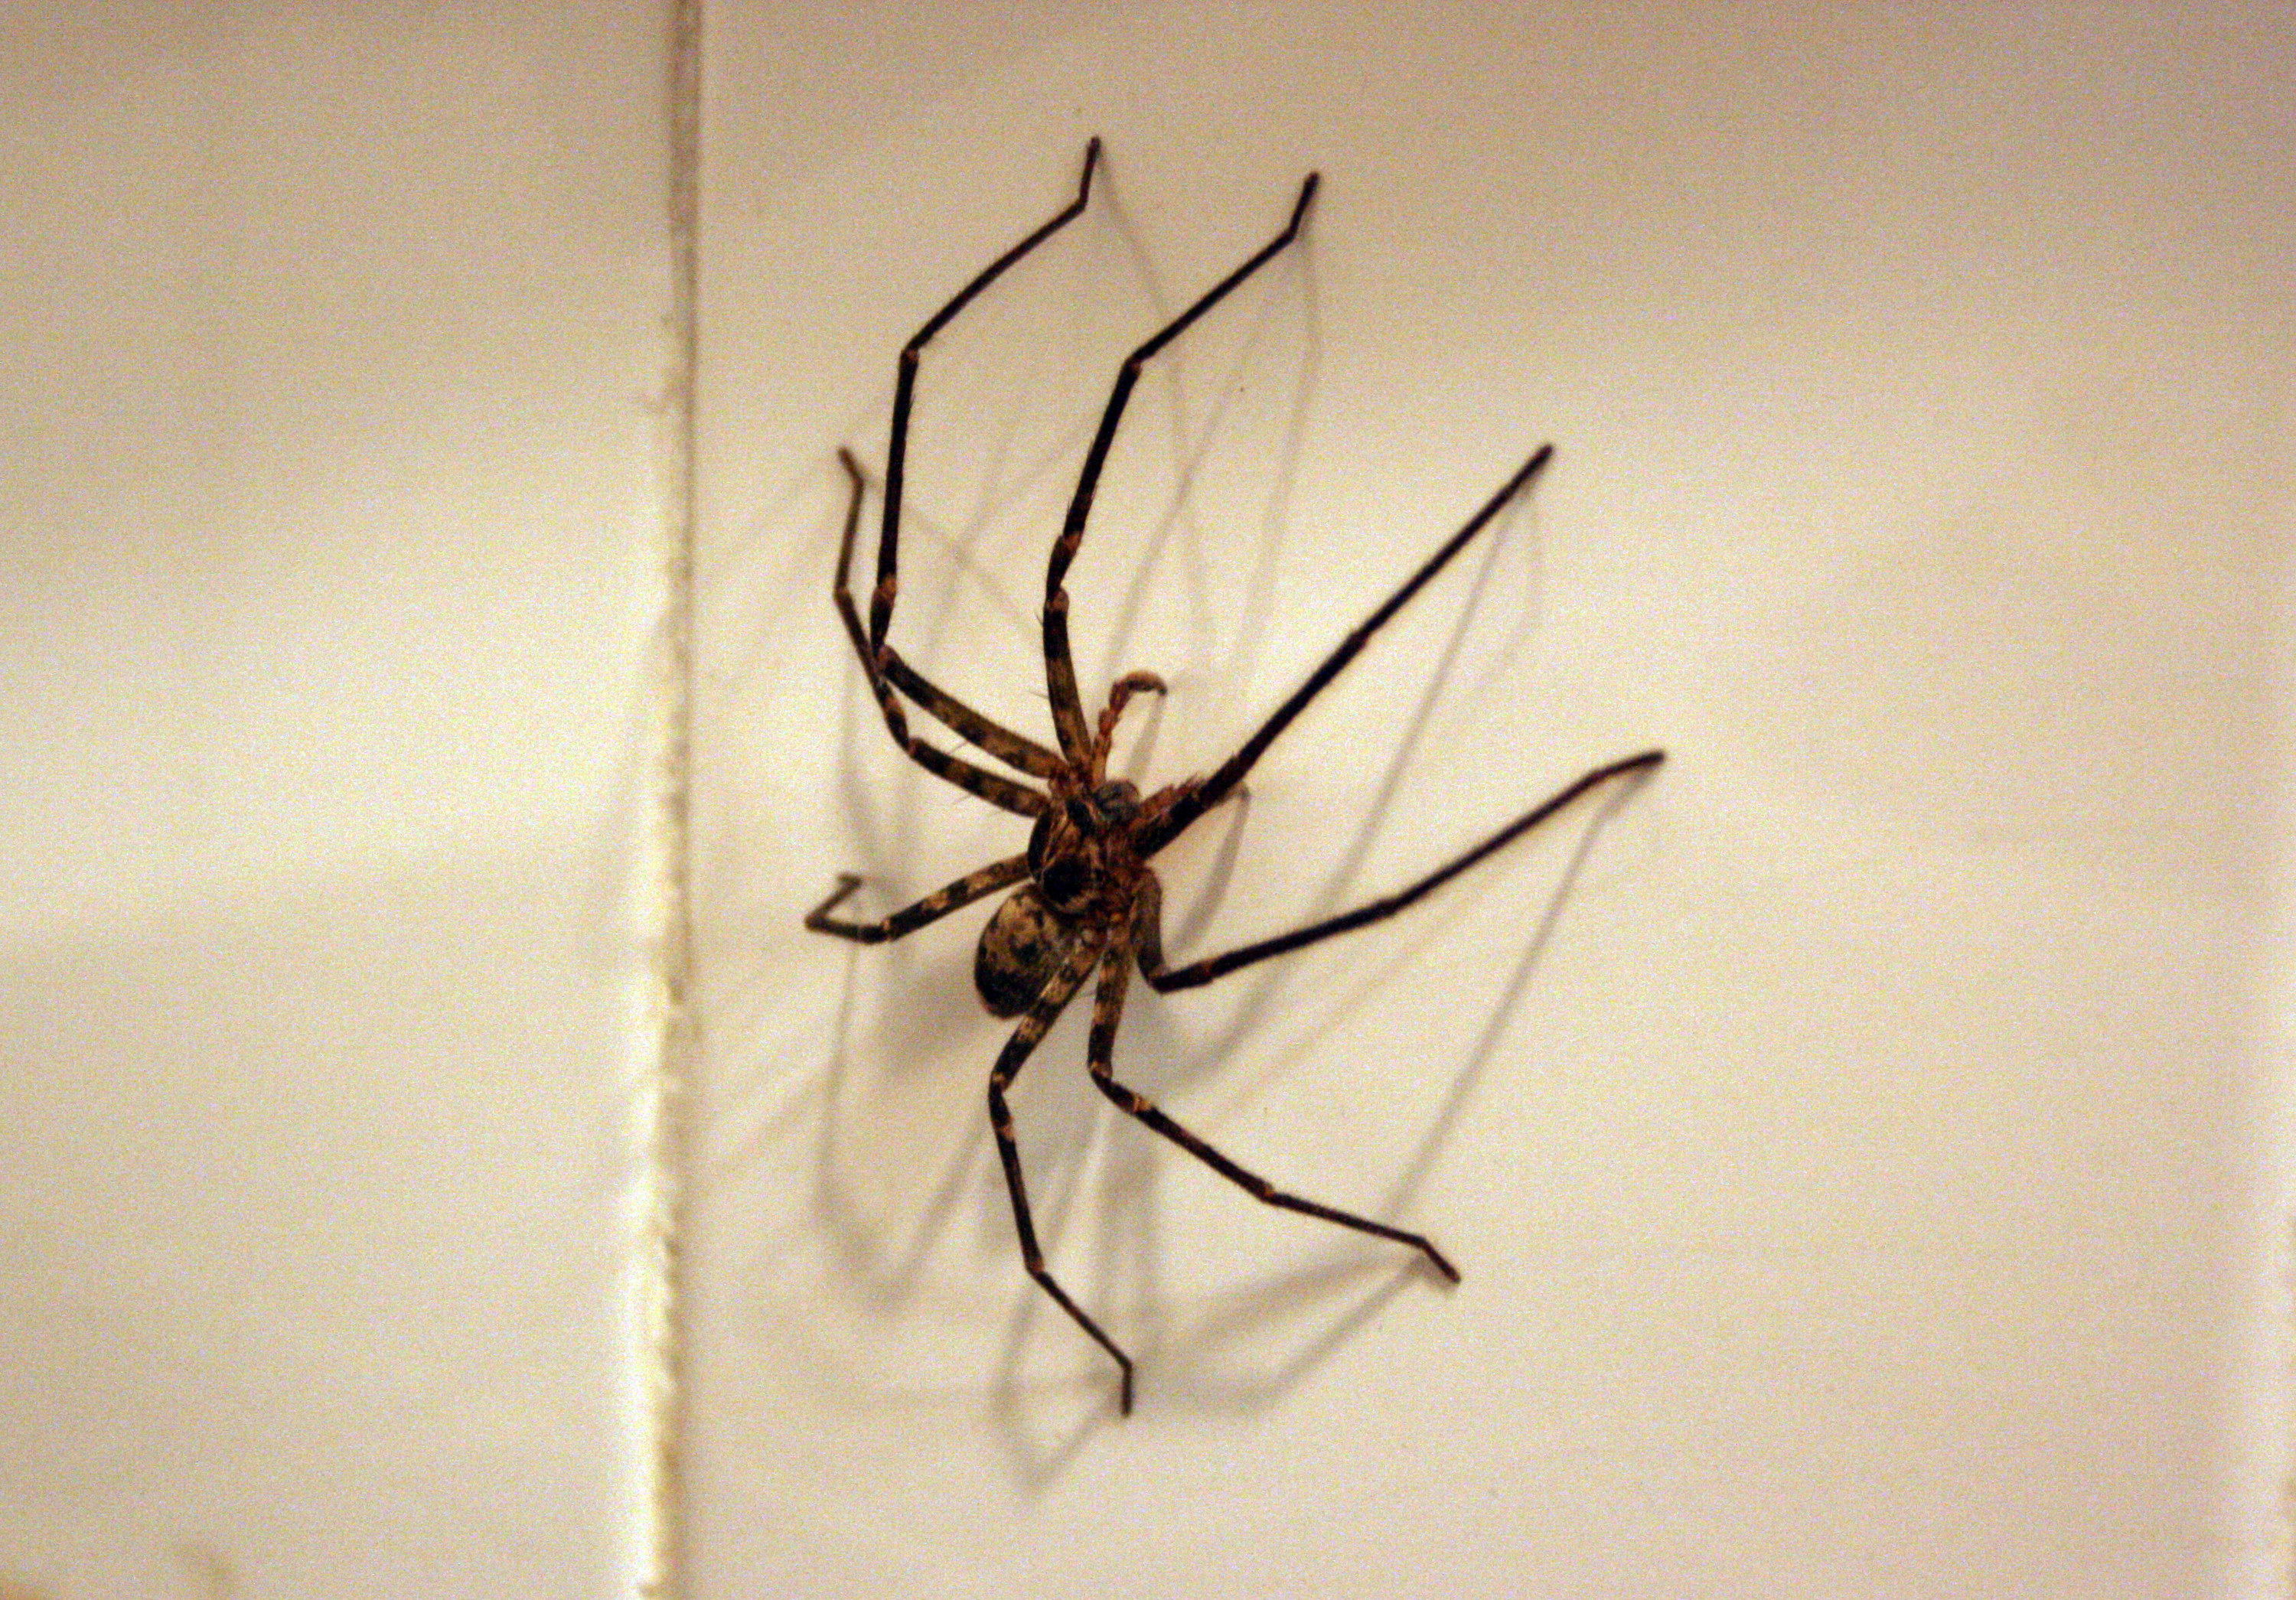 A large huntsman spider on a wall